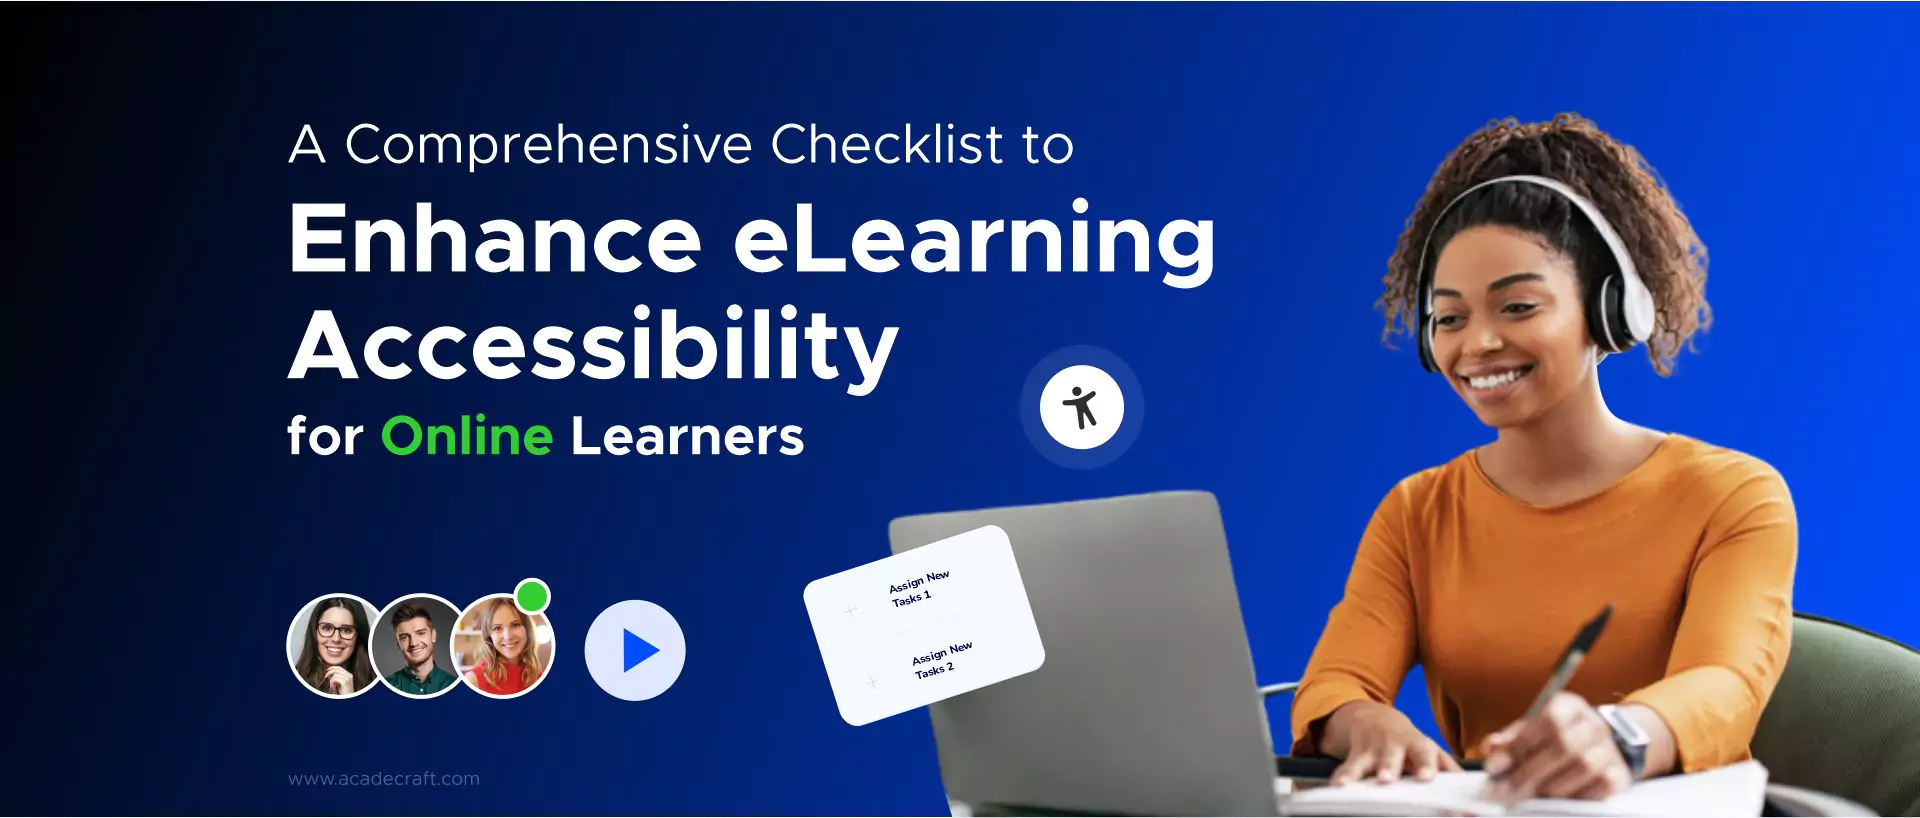 A Comprehensive Checklist to Enhance eLearning Accessibility for Online Learners